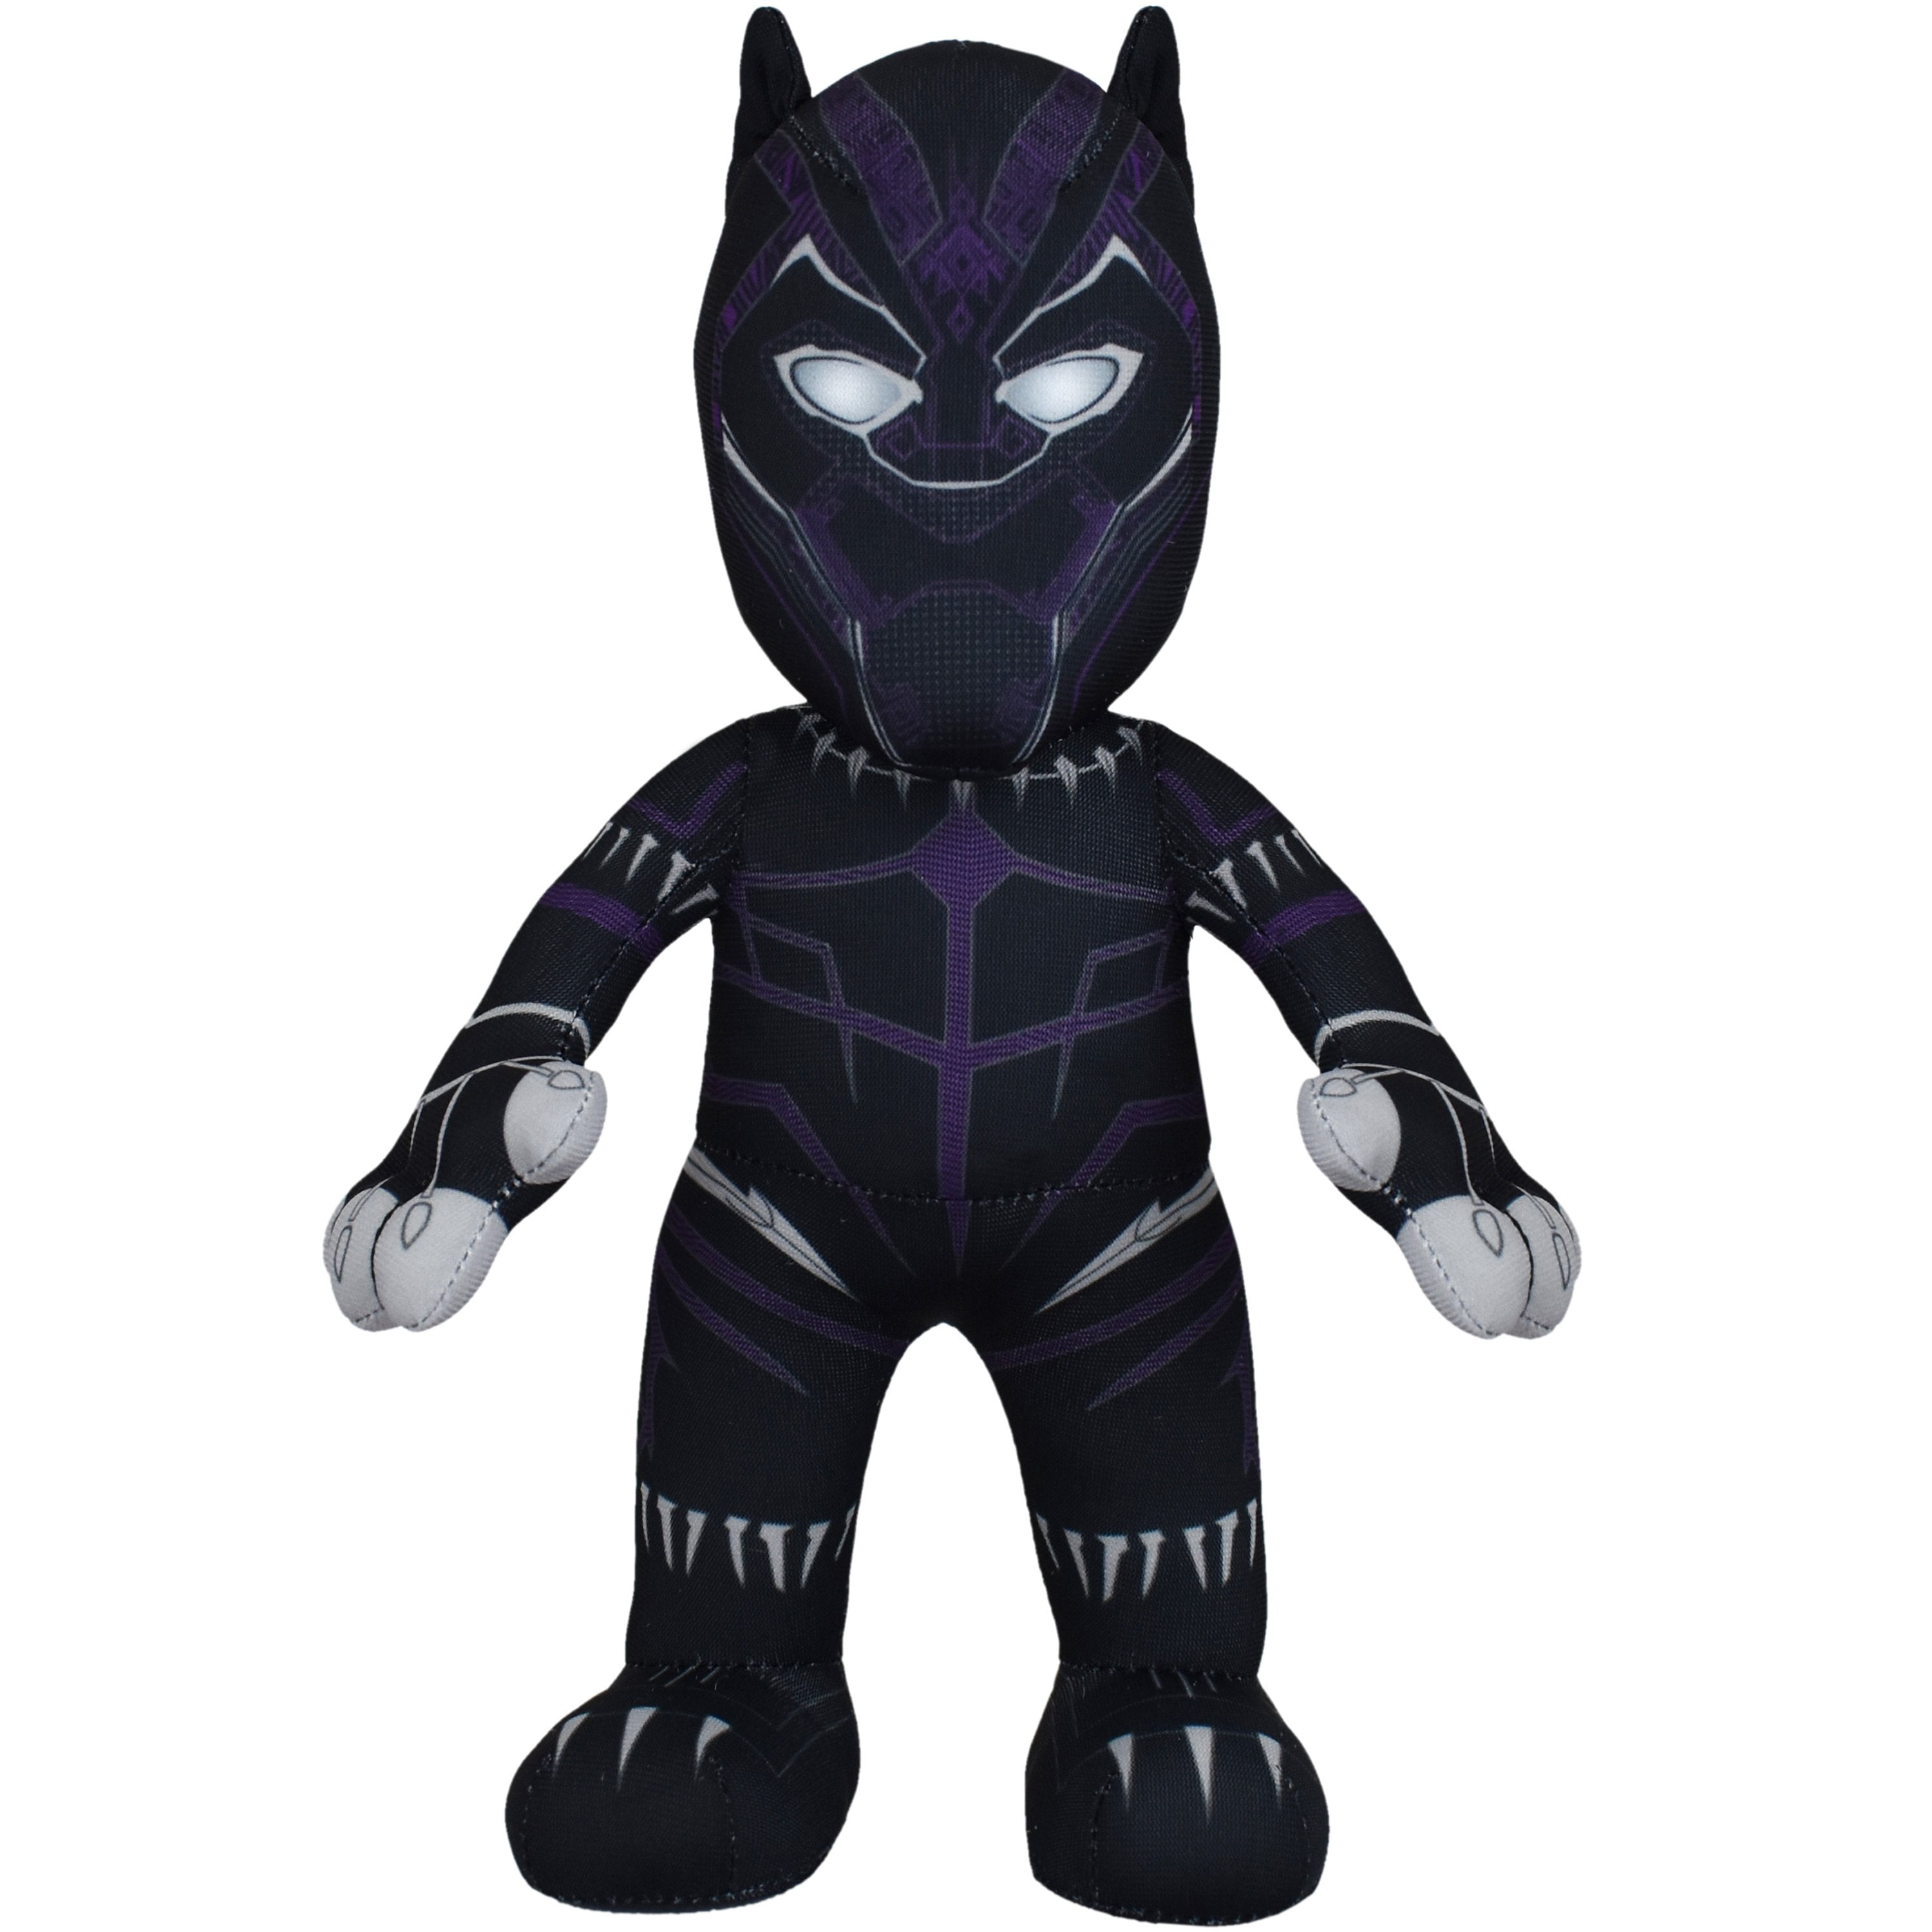 Marvel Flexers Avengers Black Panther Poseable 9 Inch Plush Figure for sale online 